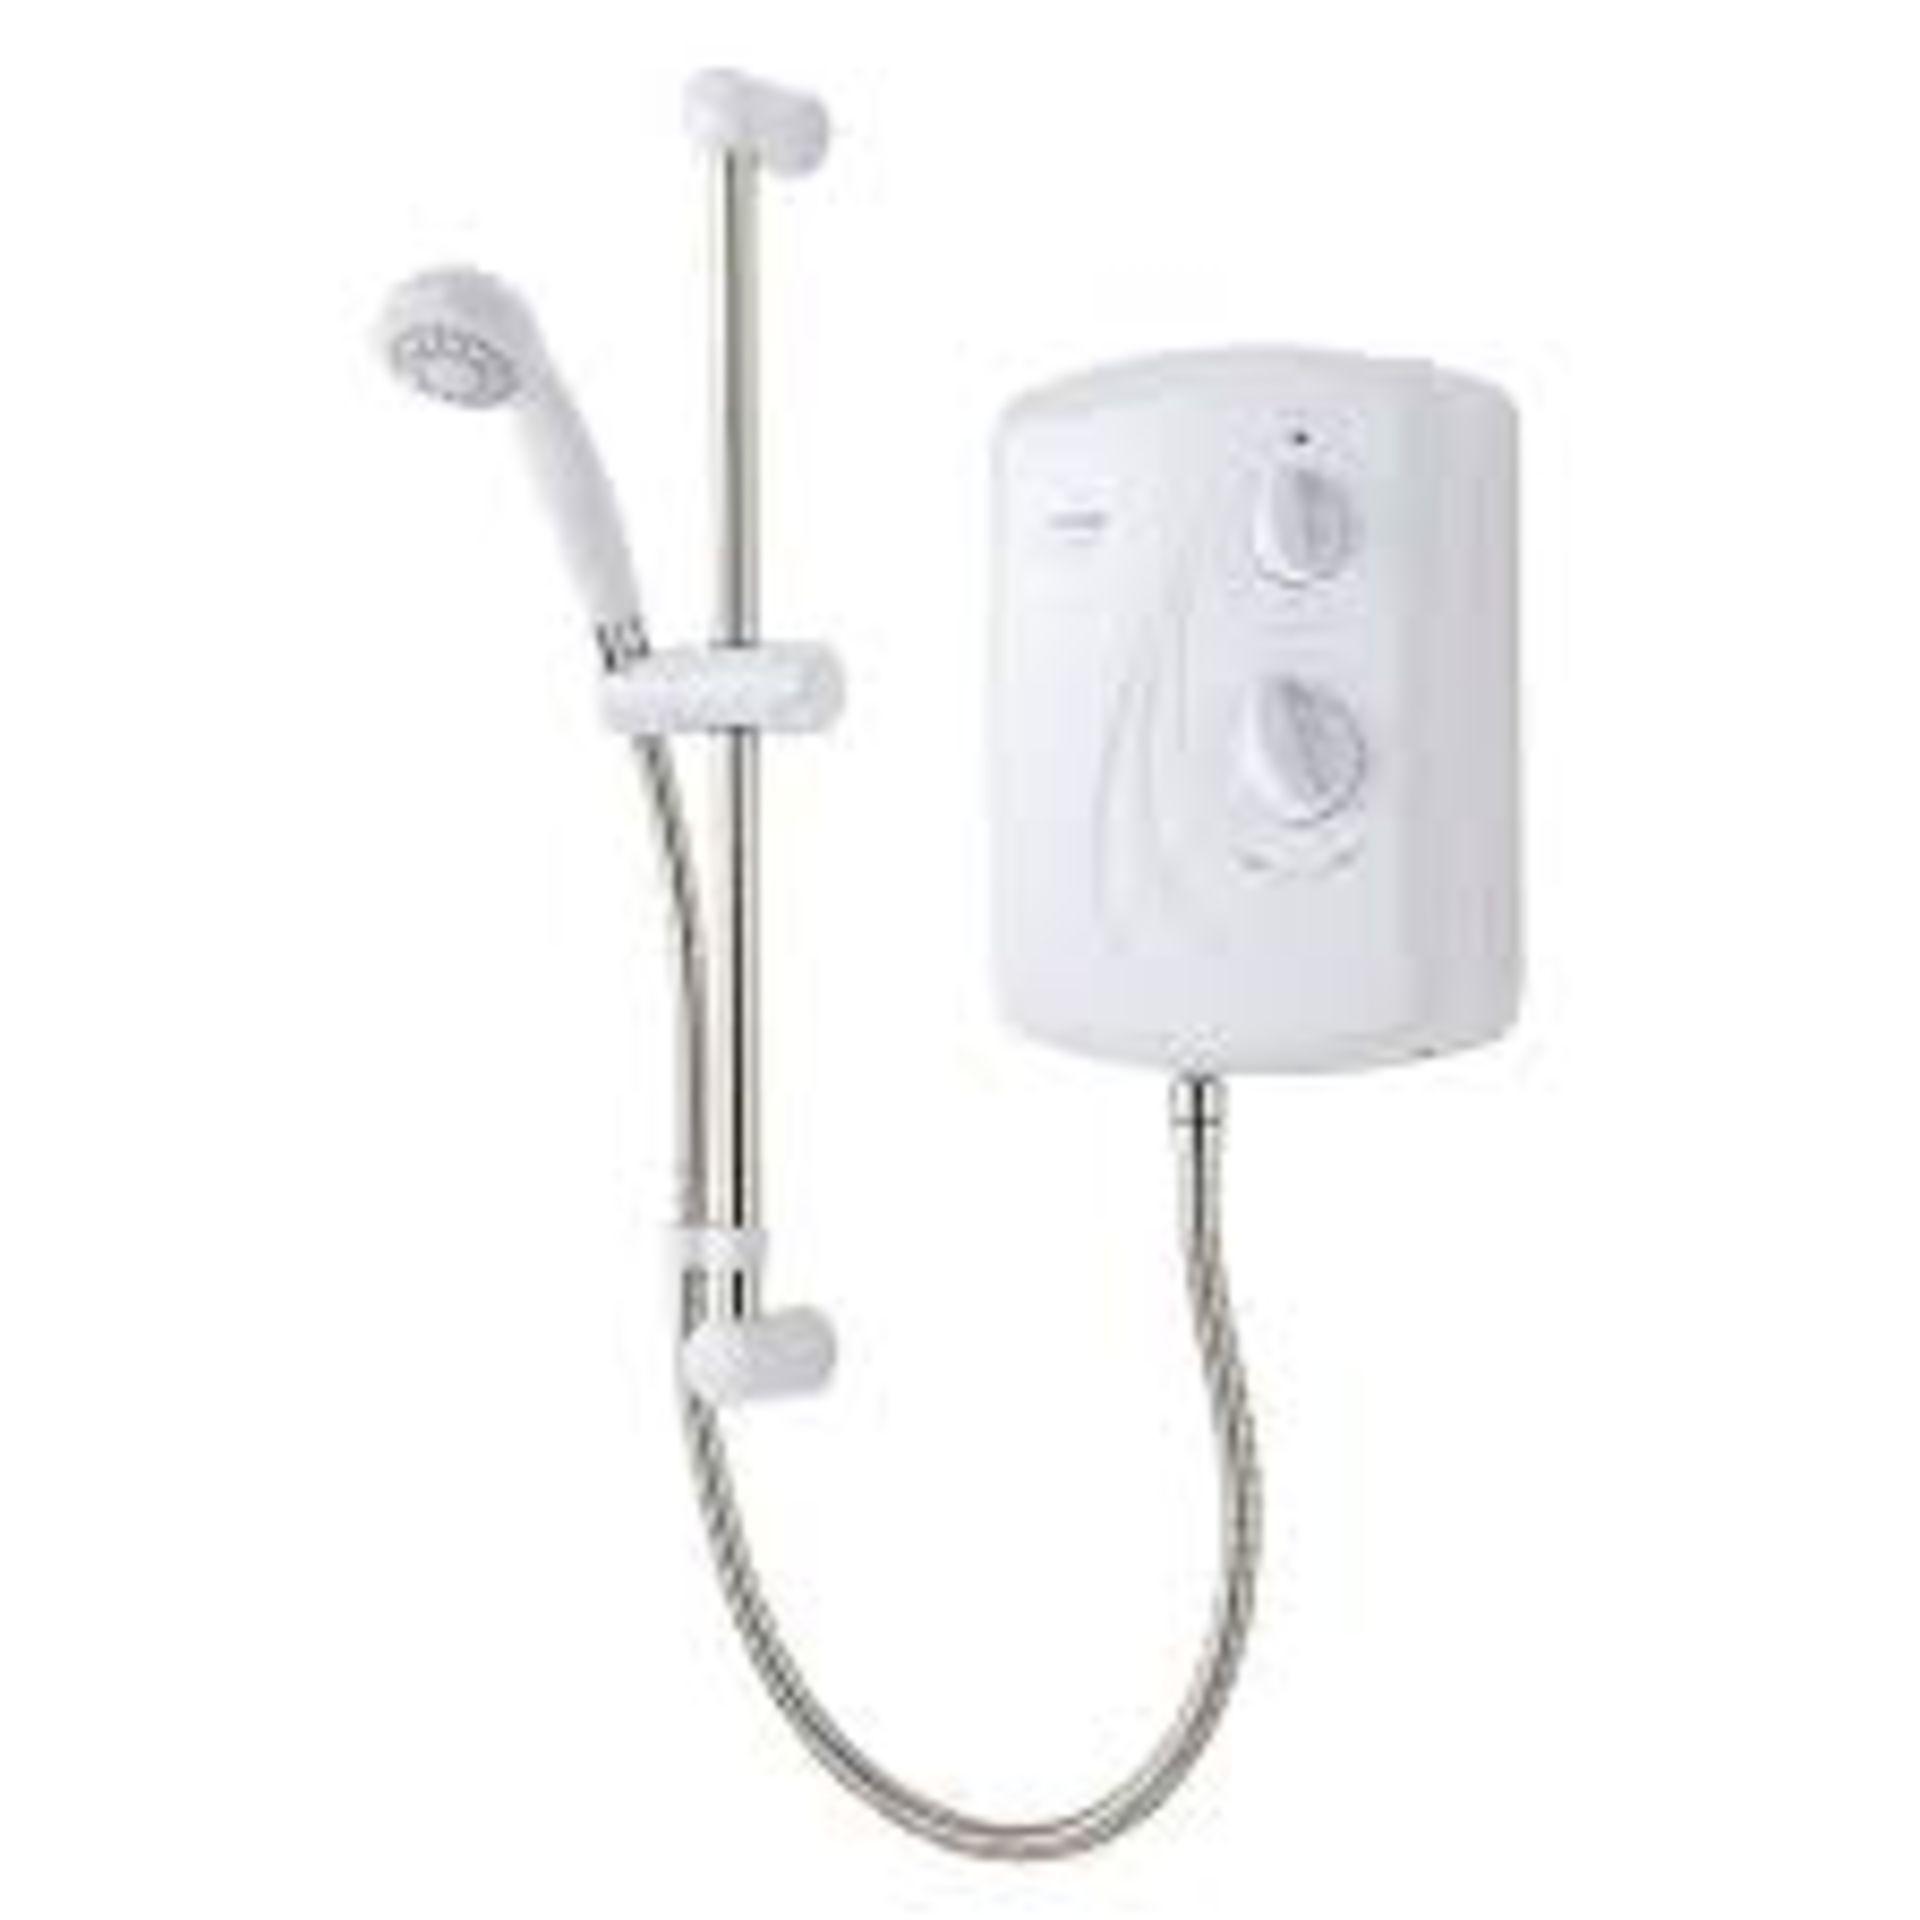 Triton Enrich White Electric Shower, 9.5kW. - P4. The award winning Enrich shower is one of Triton's